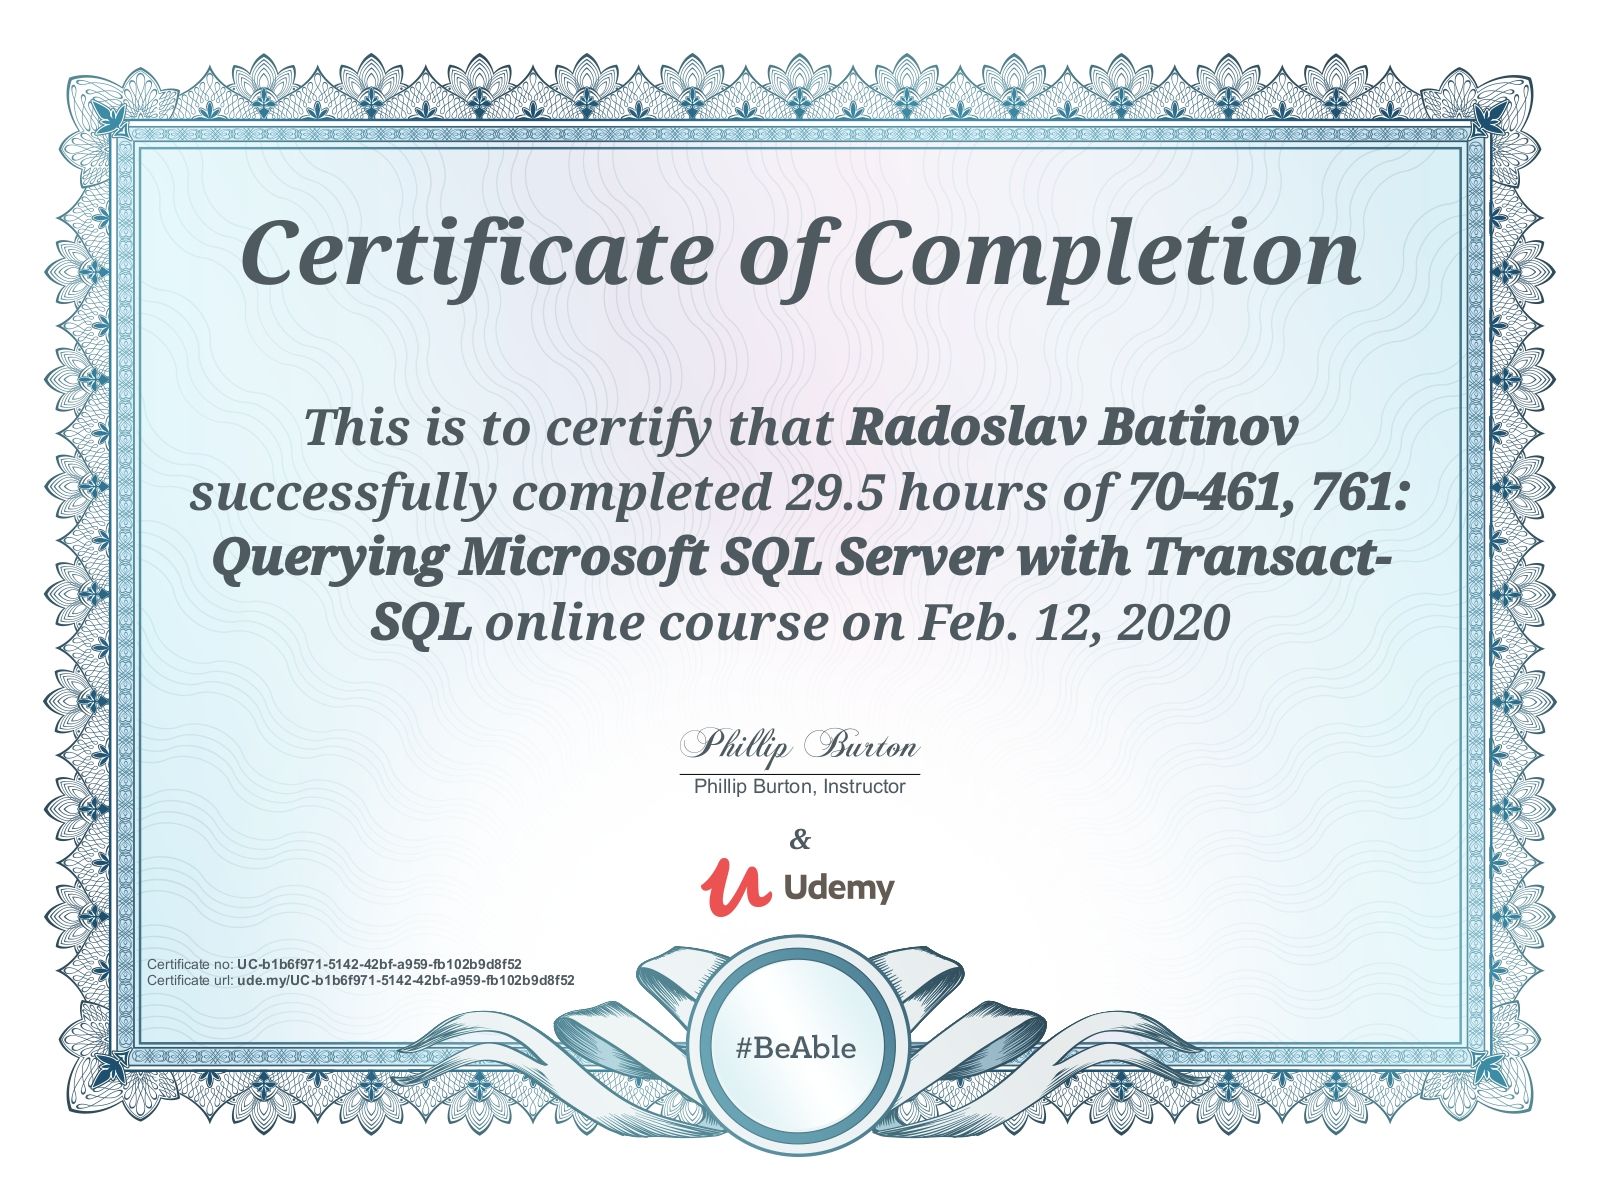 Udemy, 70-461, 761: Querying Microsoft SQL Server with Transact-SQL